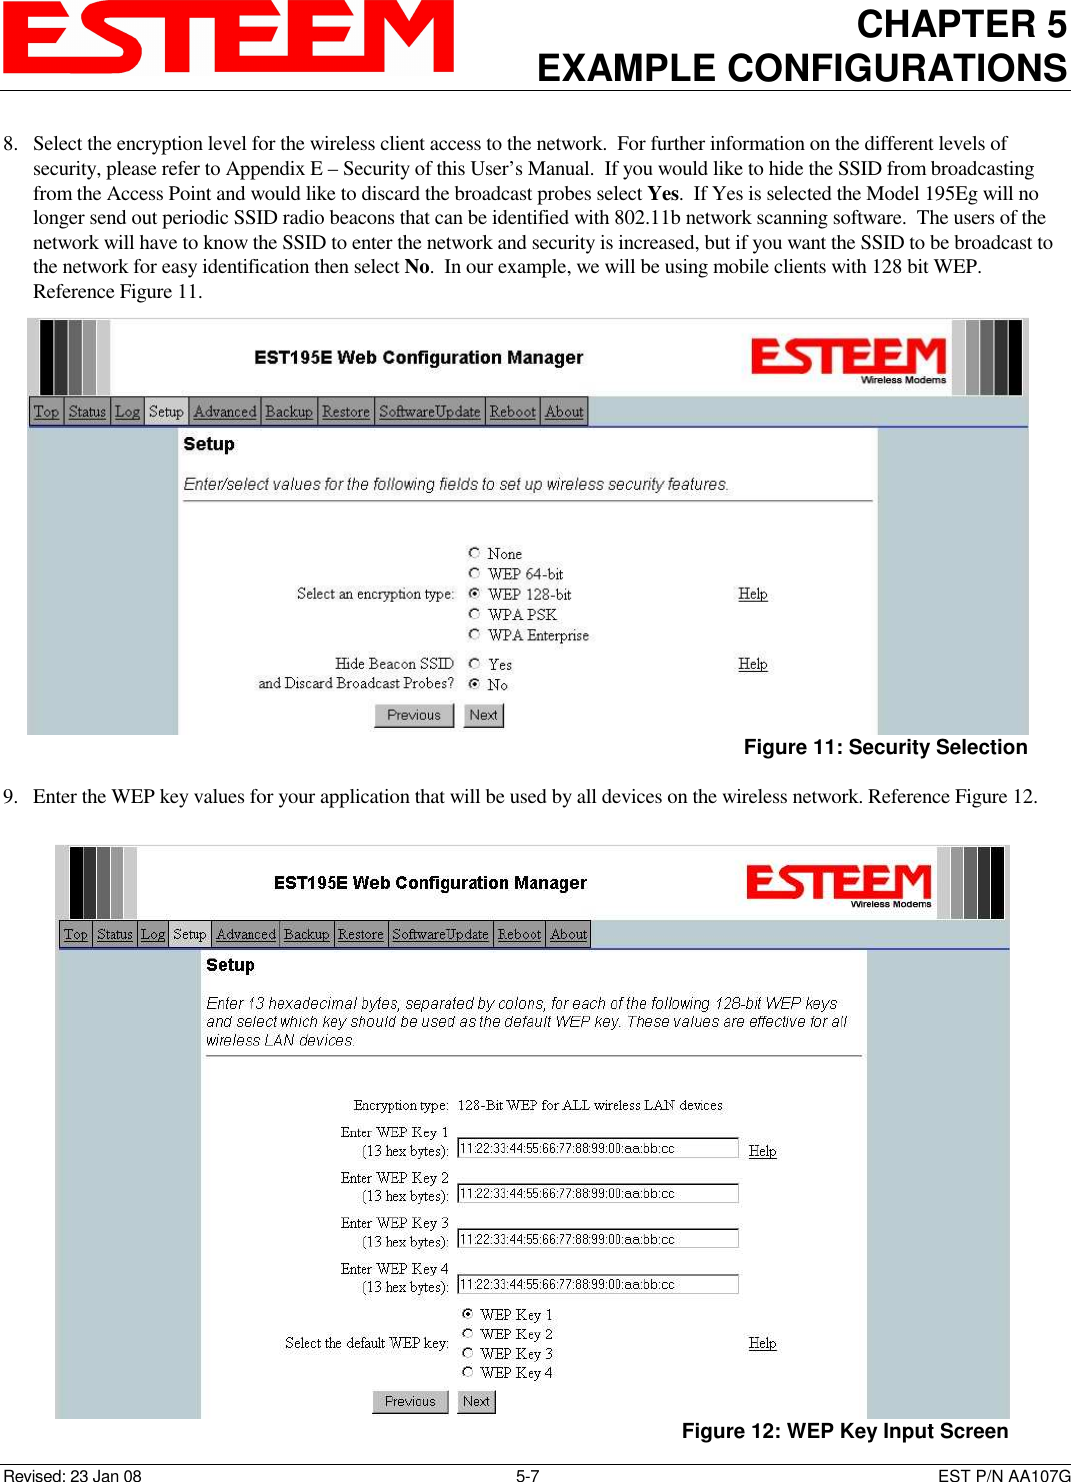 CHAPTER 5 EXAMPLE CONFIGURATIONS    Revised: 23 Jan 08  5-7  EST P/N AA107G 8. Select the encryption level for the wireless client access to the network.  For further information on the different levels of security, please refer to Appendix E – Security of this User’s Manual.  If you would like to hide the SSID from broadcasting from the Access Point and would like to discard the broadcast probes select Yes.  If Yes is selected the Model 195Eg will no longer send out periodic SSID radio beacons that can be identified with 802.11b network scanning software.  The users of the network will have to know the SSID to enter the network and security is increased, but if you want the SSID to be broadcast to the network for easy identification then select No.  In our example, we will be using mobile clients with 128 bit WEP.  Reference Figure 11.  9. Enter the WEP key values for your application that will be used by all devices on the wireless network. Reference Figure 12.   Figure 11: Security Selection  Figure 12: WEP Key Input Screen 